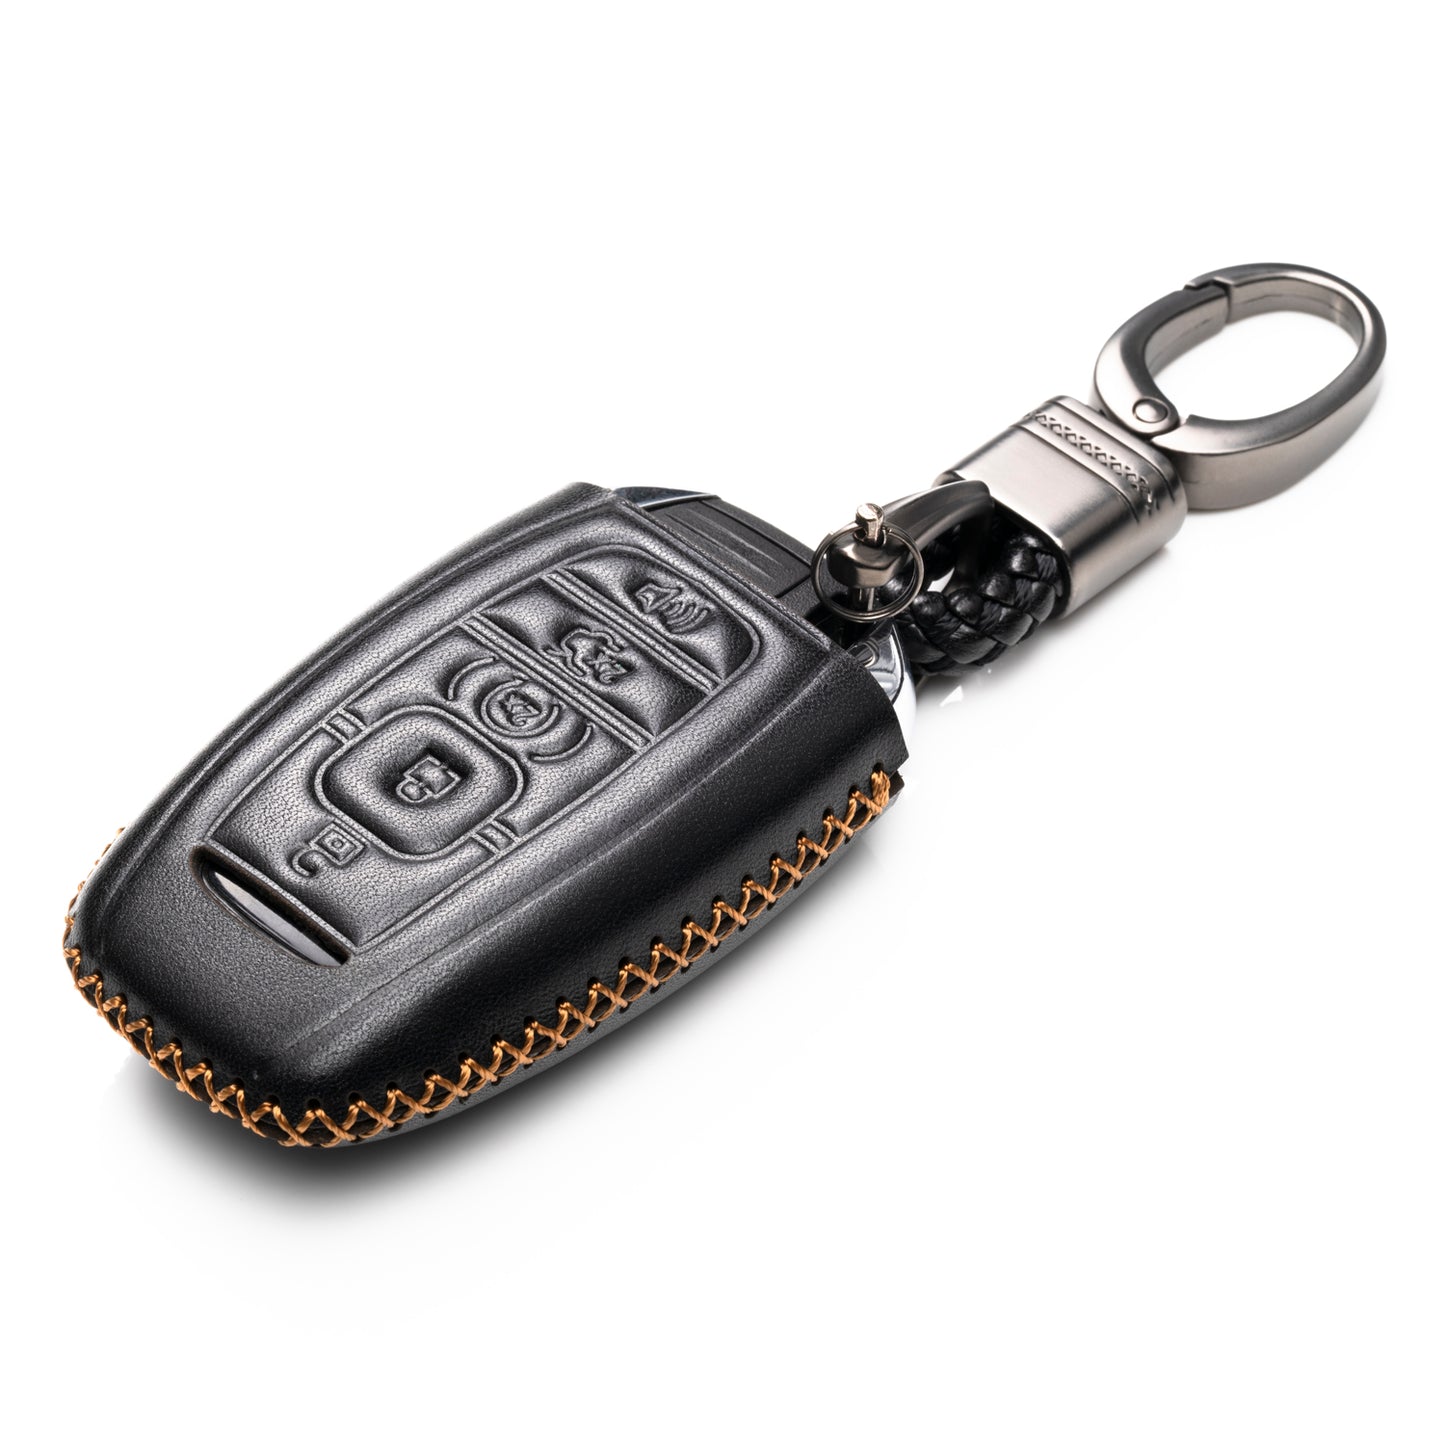 Vitodeco 5-Button Genuine Leather Smart Key Fob Case Cover Compatible with Lincoln Continental, MKC, MKZ, MKX 2017 - 2022, Lincoln Navigator 2018 - 2022, Lincoln Nautilus 2020 - 2022